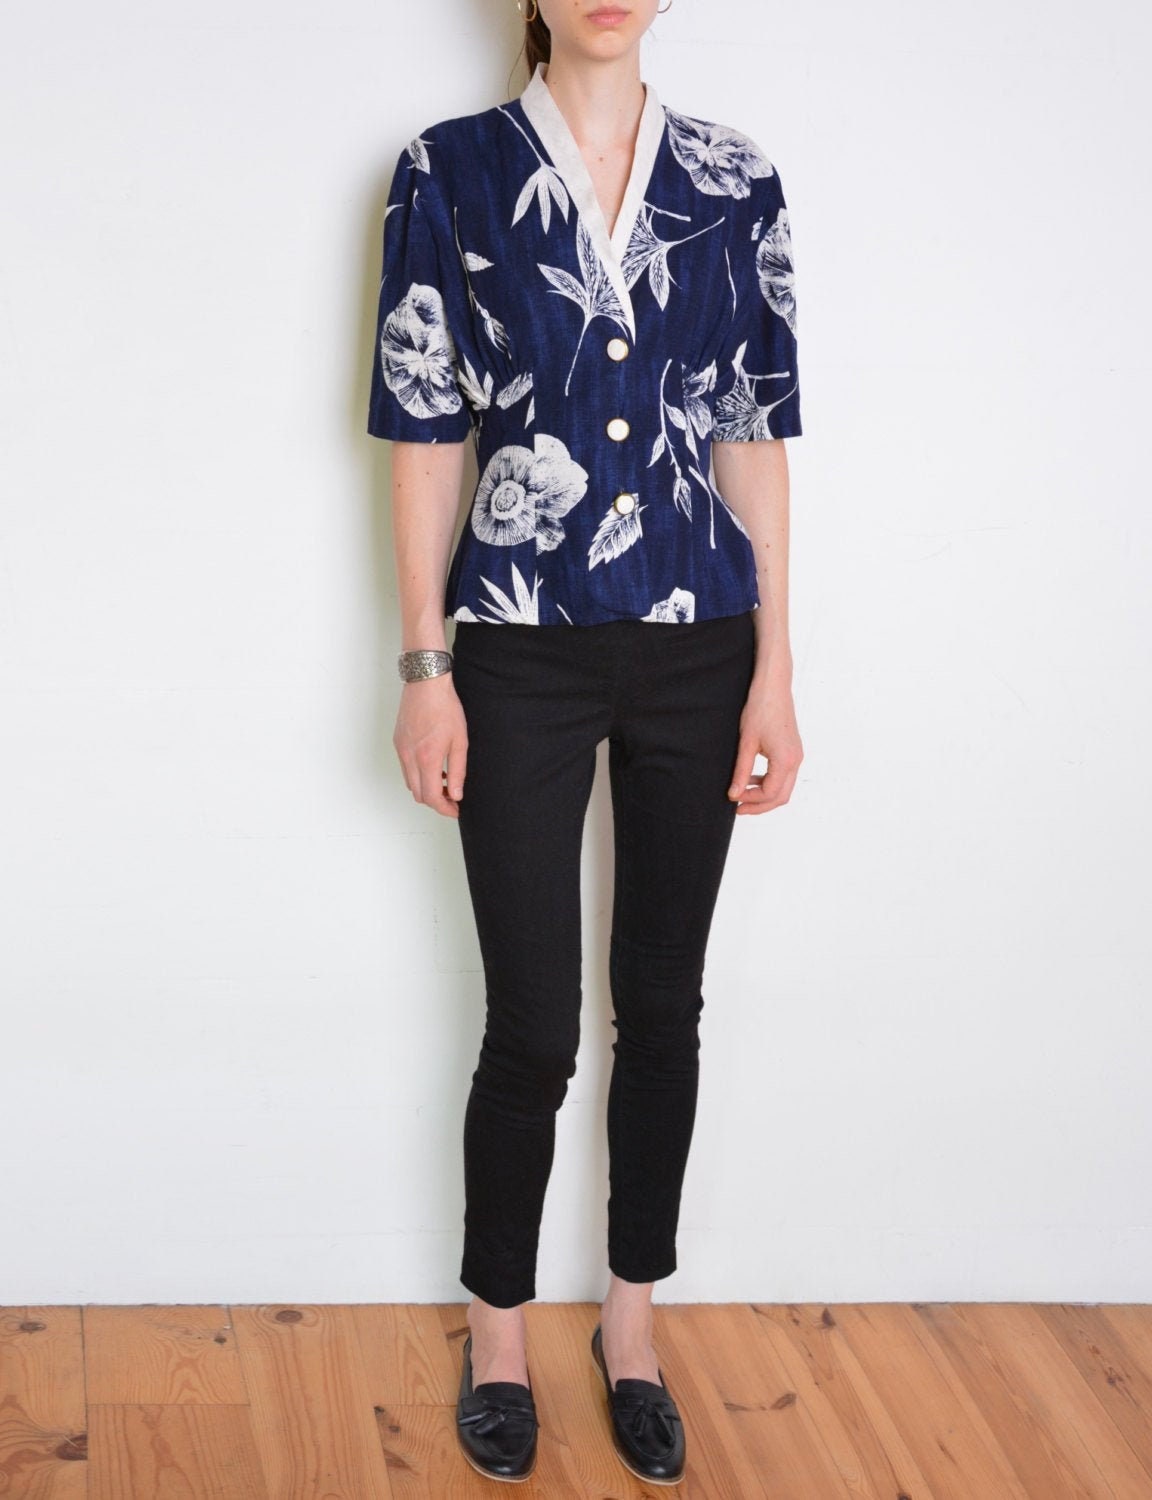 90's Blazer Style Blouse, Flax Blend Floral Short Sleeve British Navy Blue & White, Tessara London Made in Great Britain